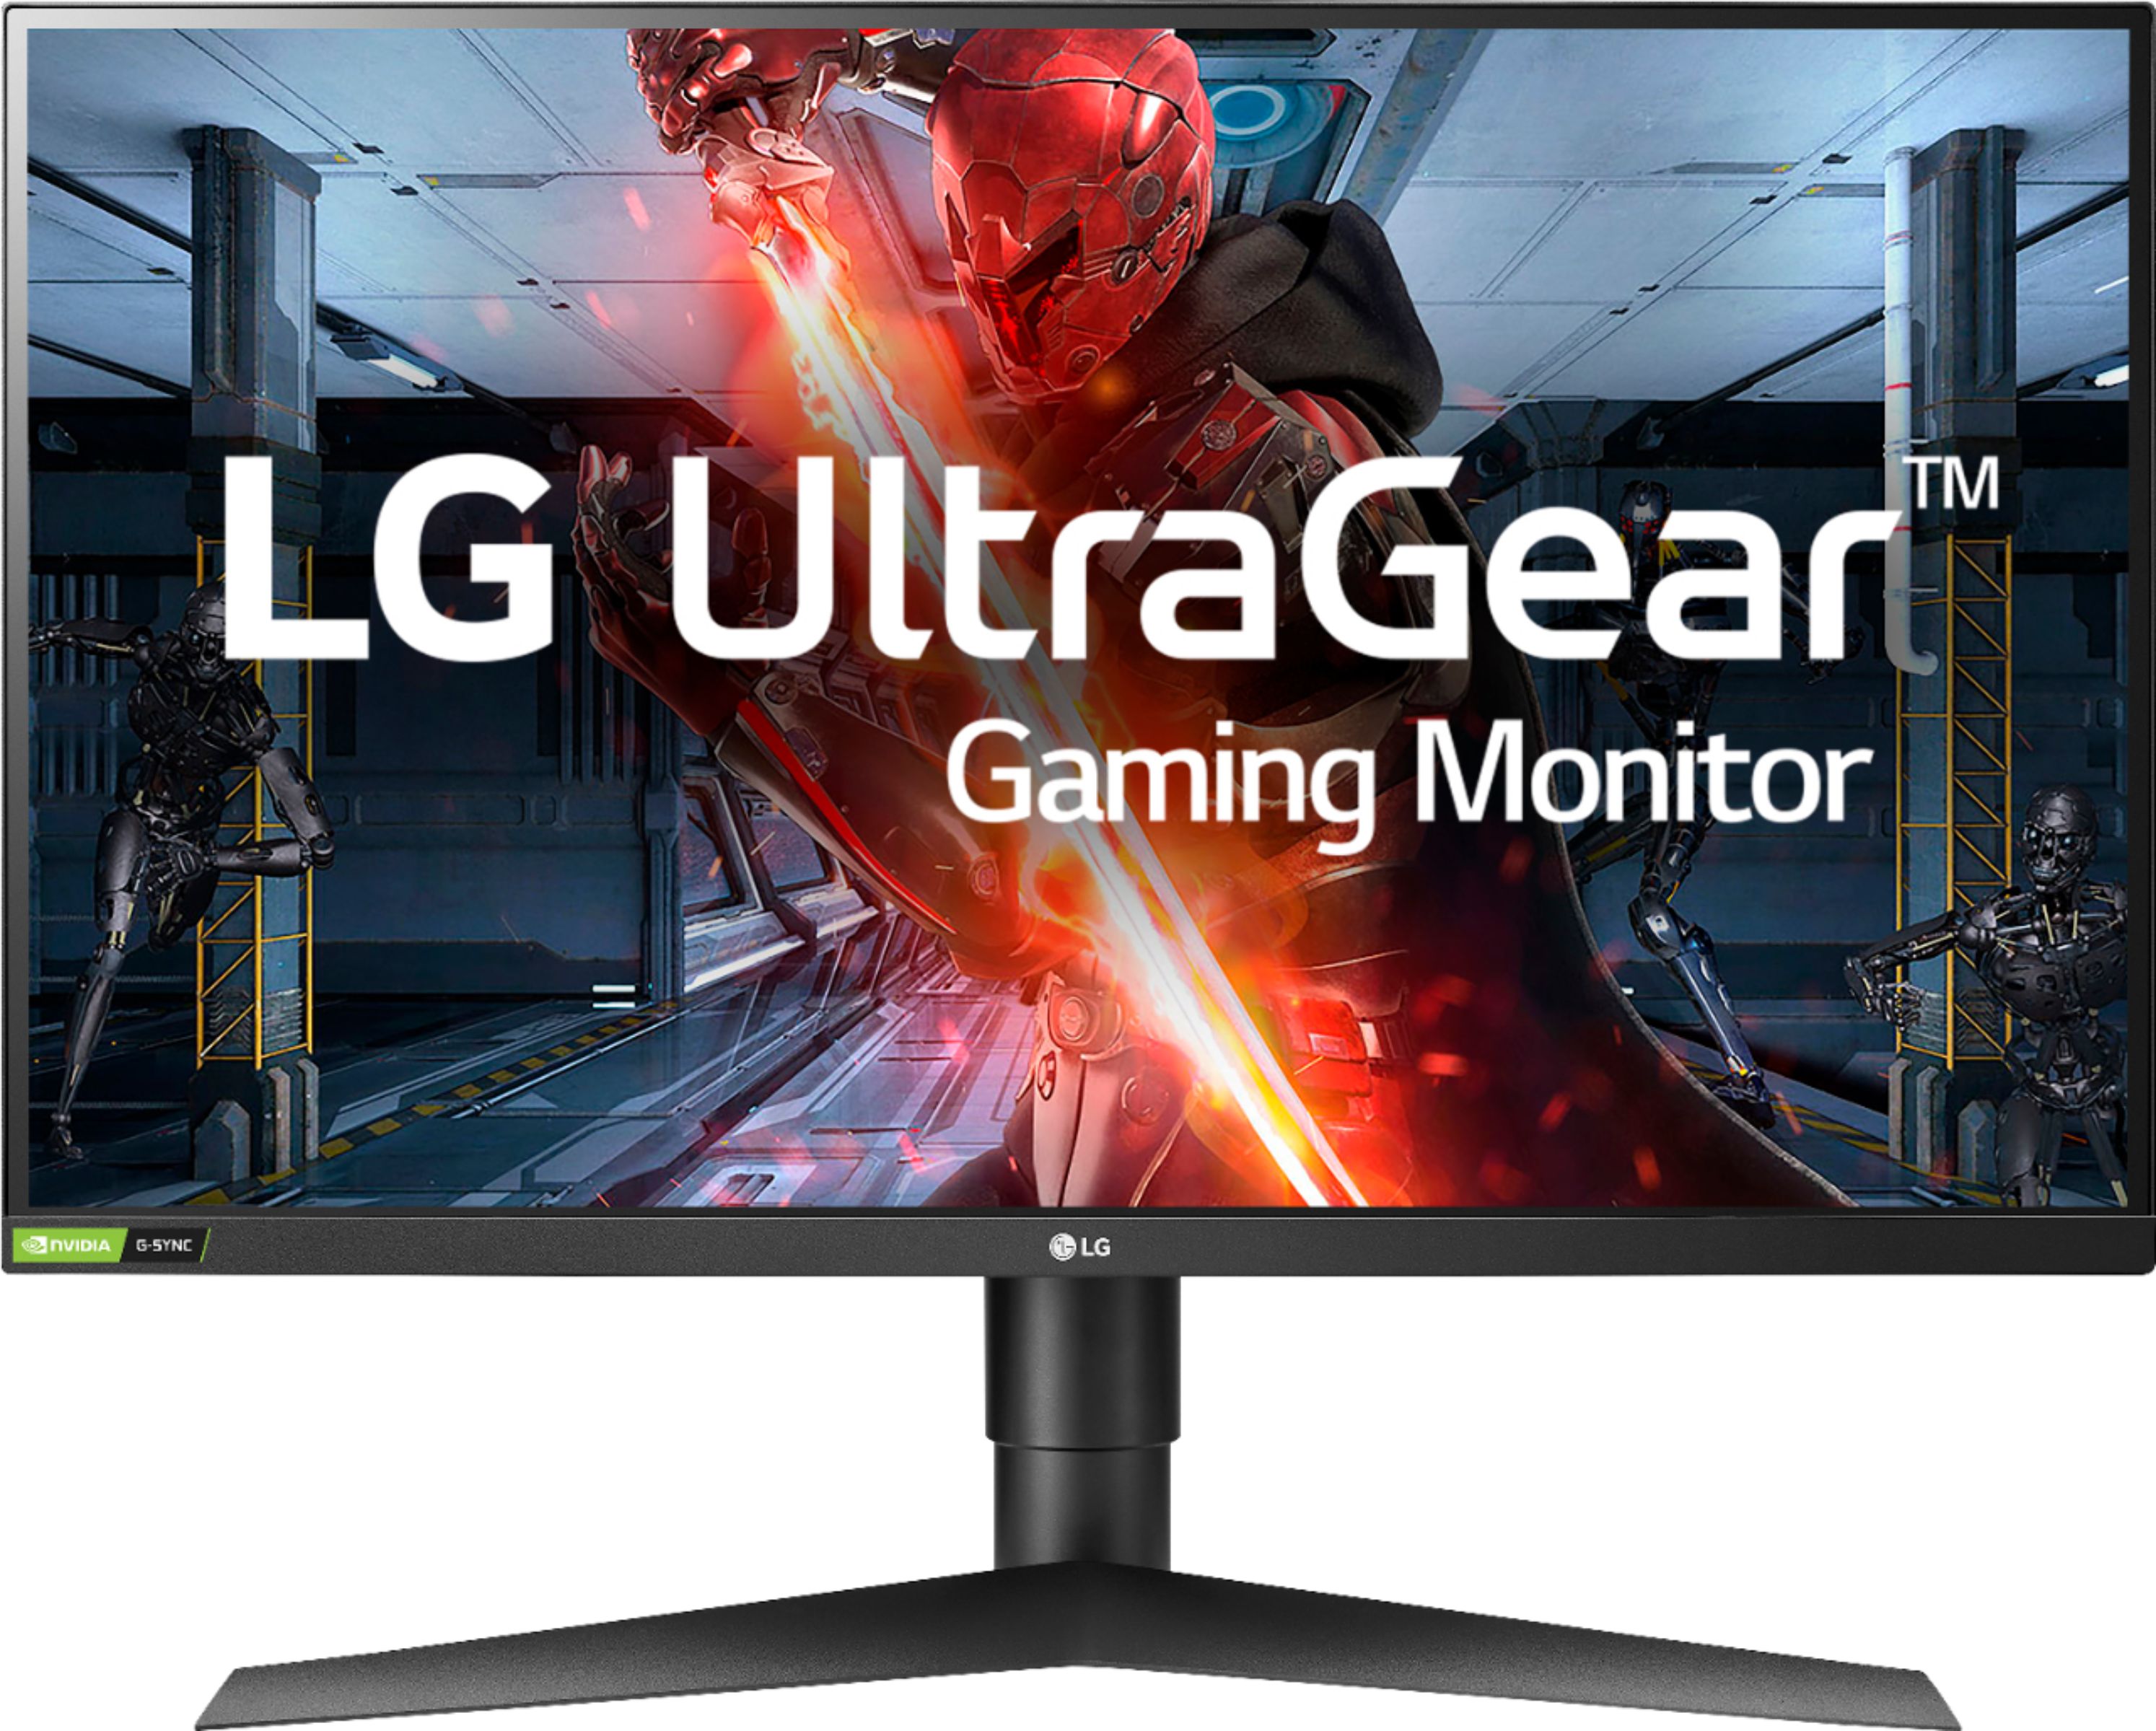 LG UltraGear gaming monitor deal gets price discounted by massive 35% on